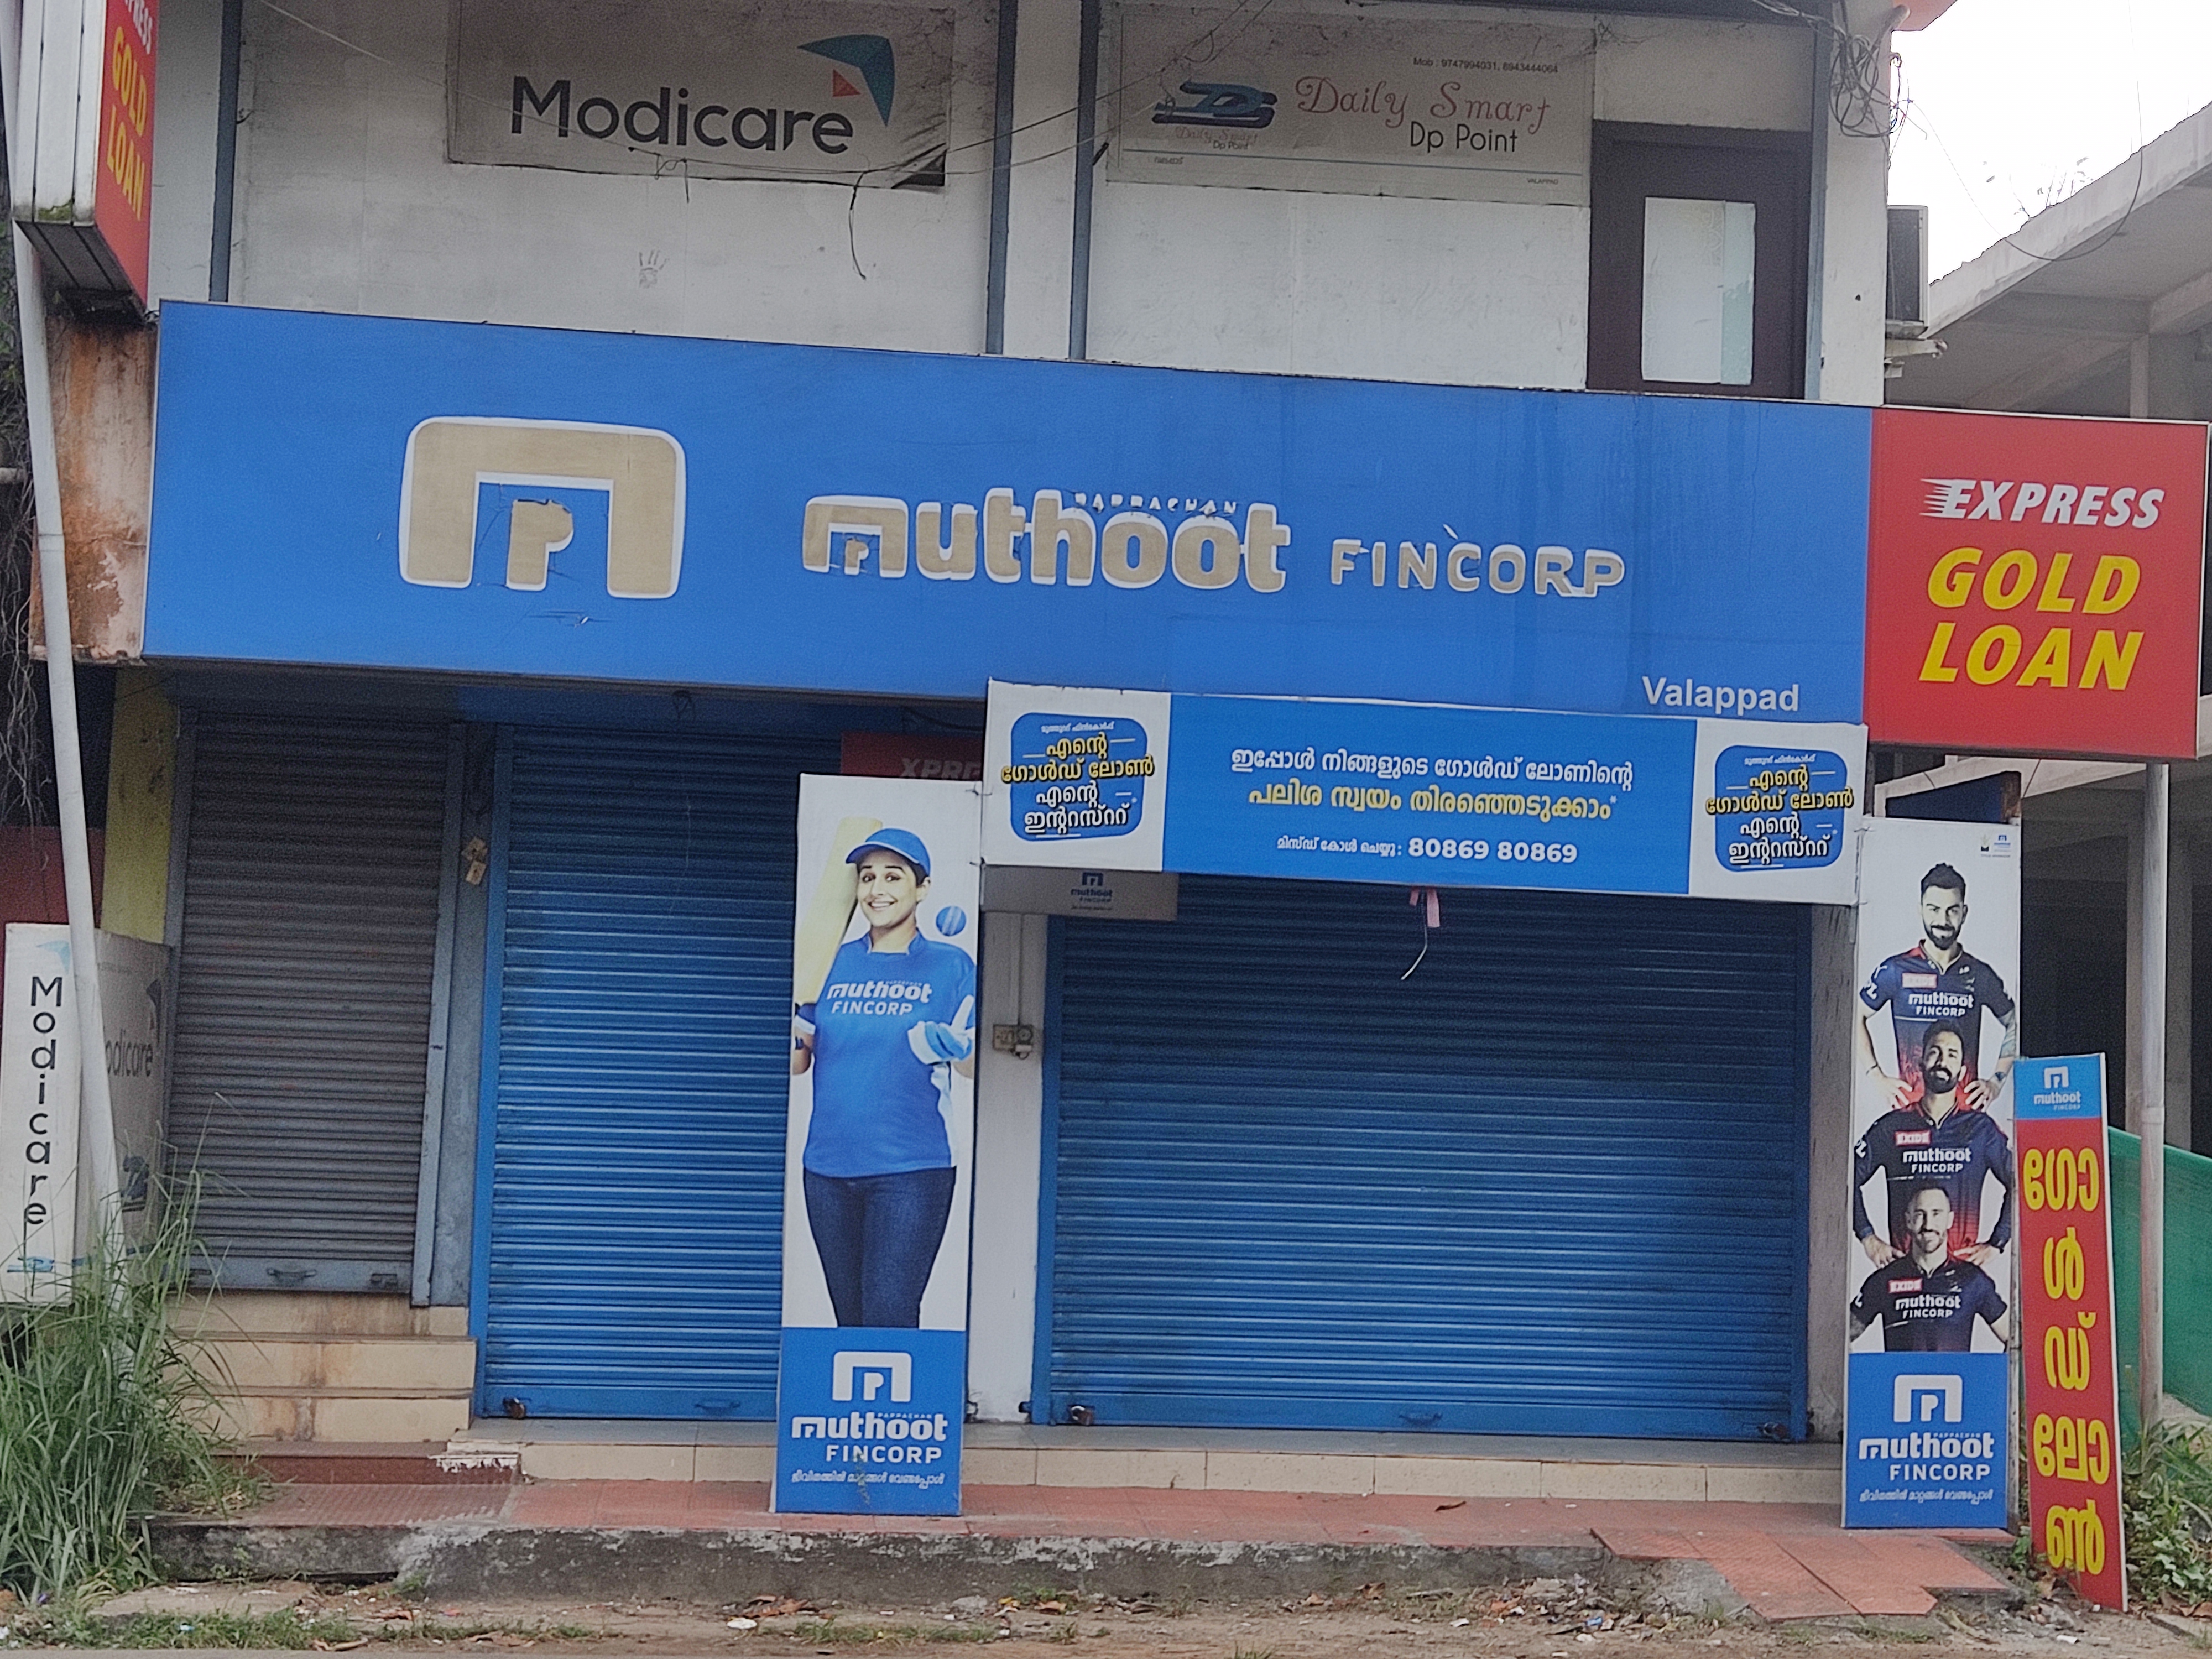 Photos and Videos of Muthoot Fincorp Gold Loan in Valappad, Thrissur